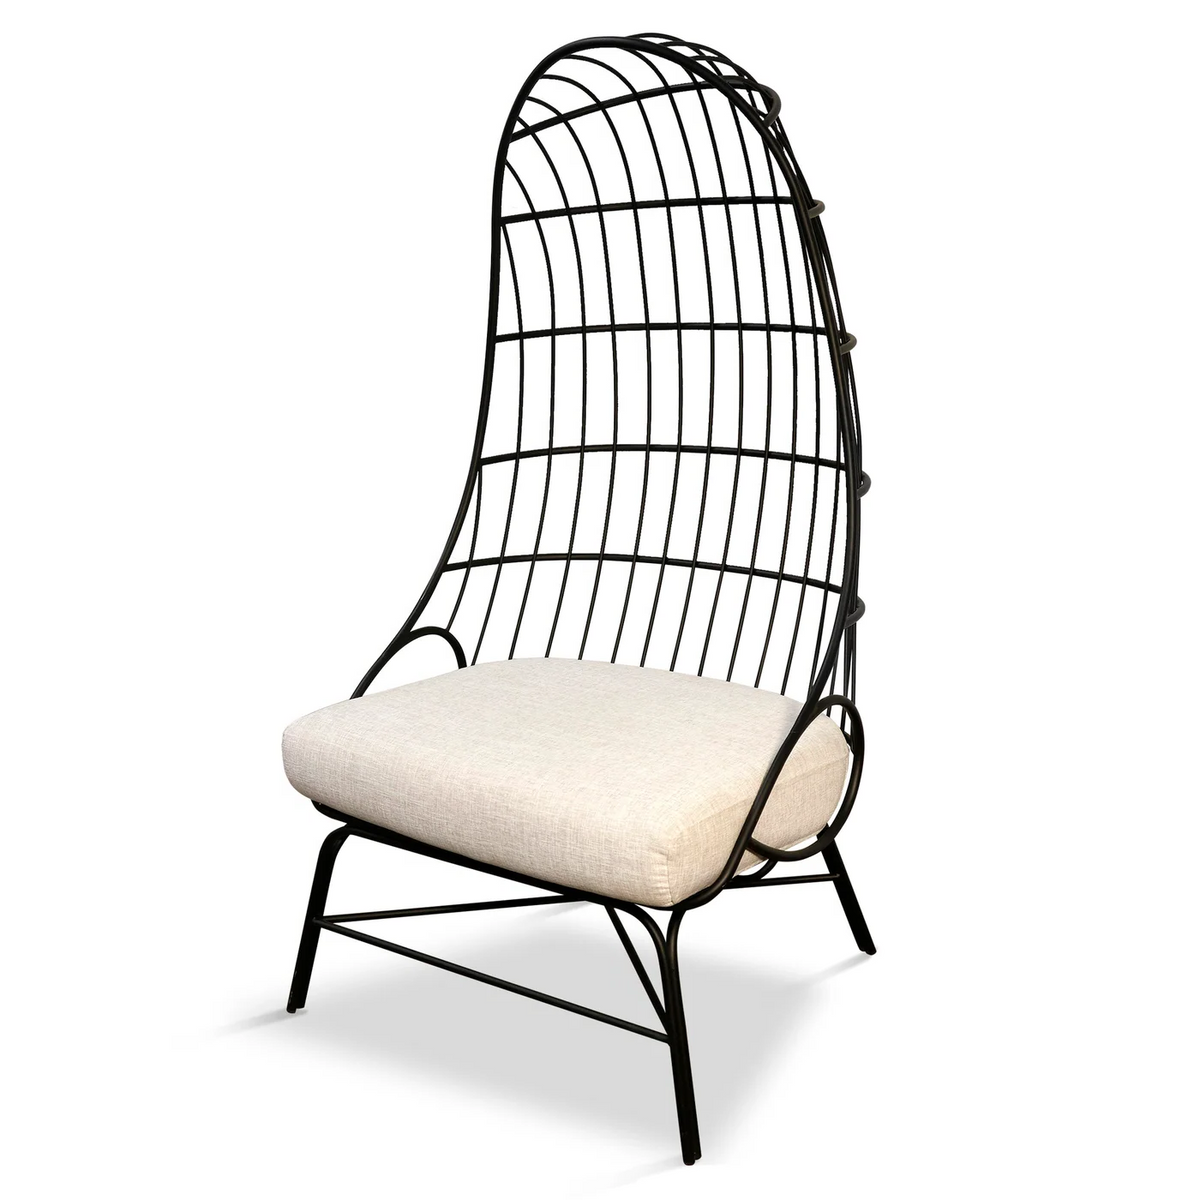 HULL OUTDOOR CHAIR